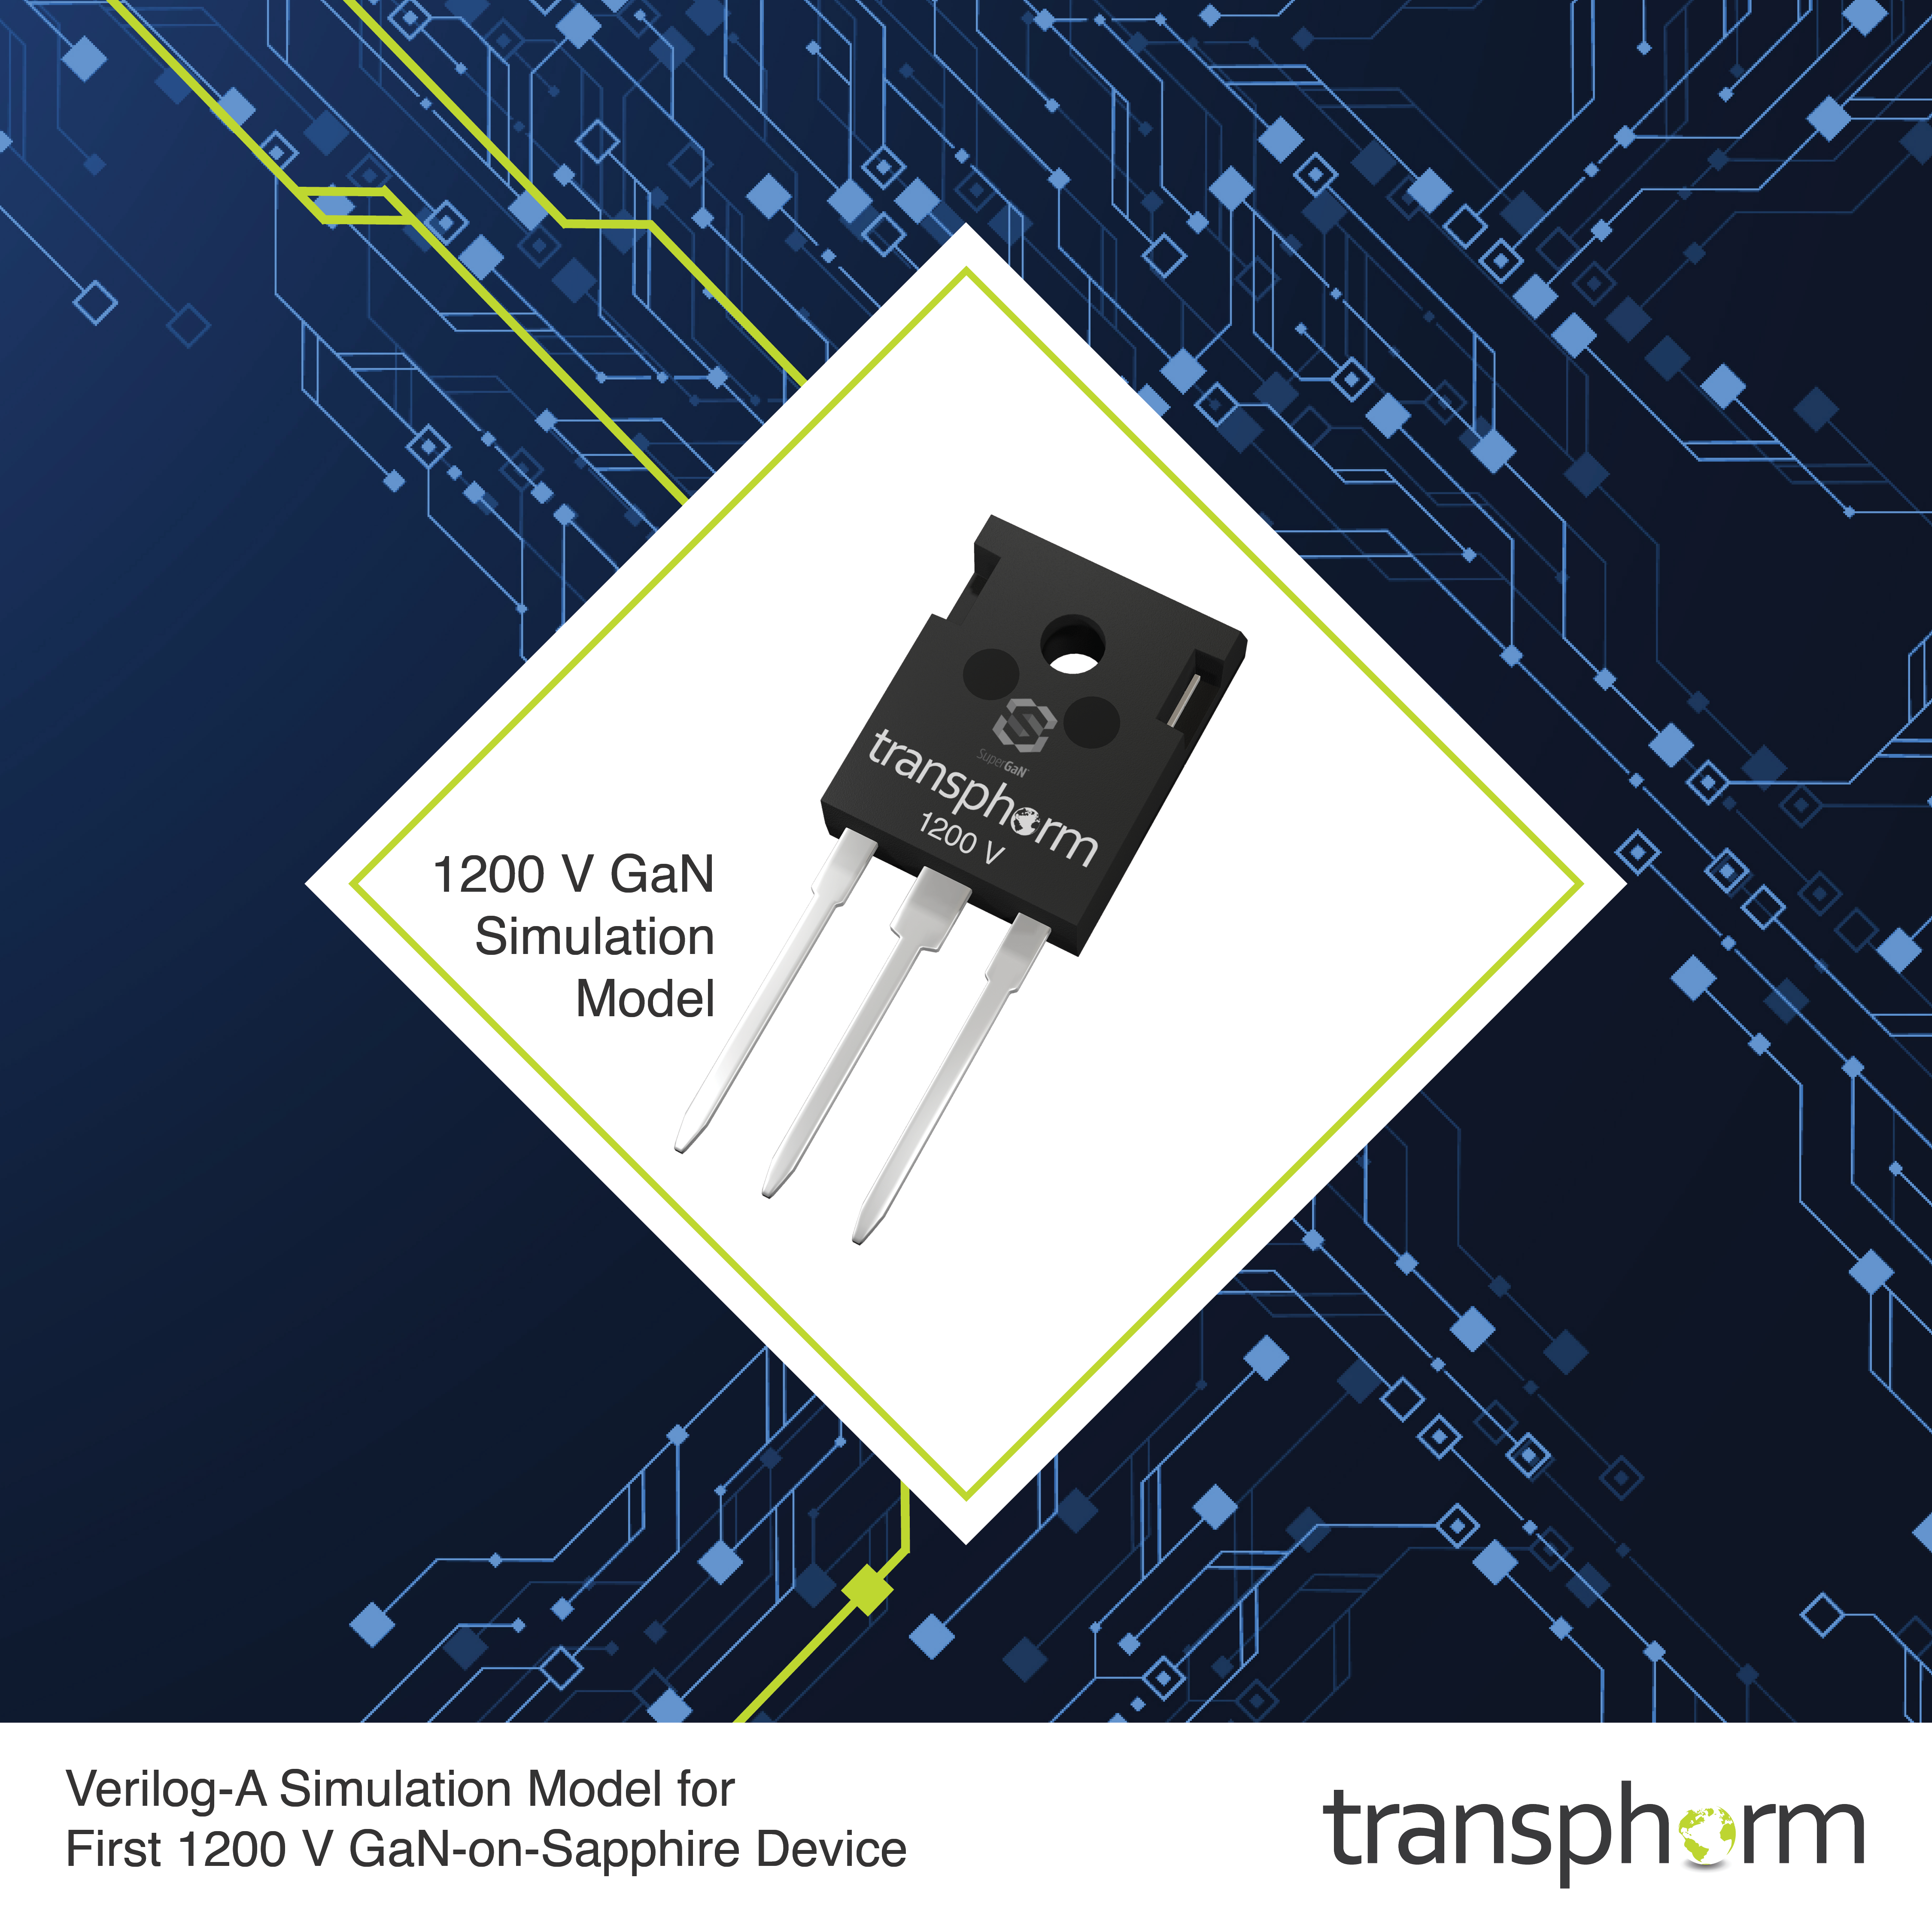 Simulation Model of Industry's First 1200 V GaN-on-Sapphire Device Released by Transphorm